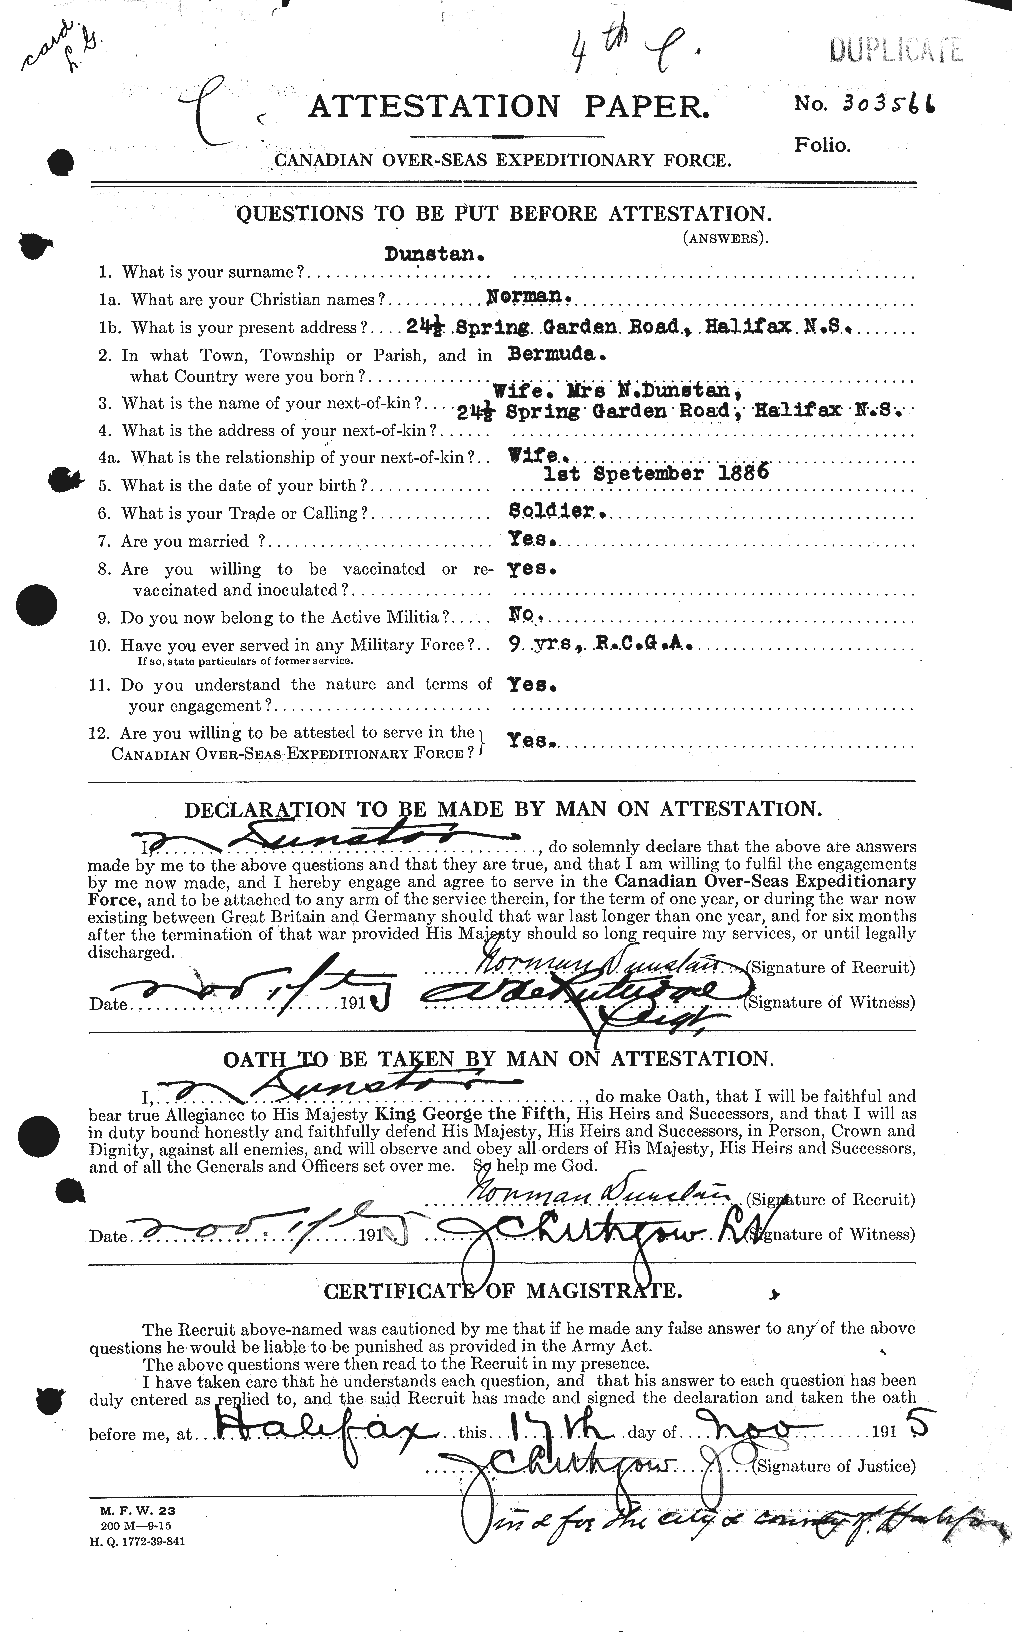 Personnel Records of the First World War - CEF 304951a